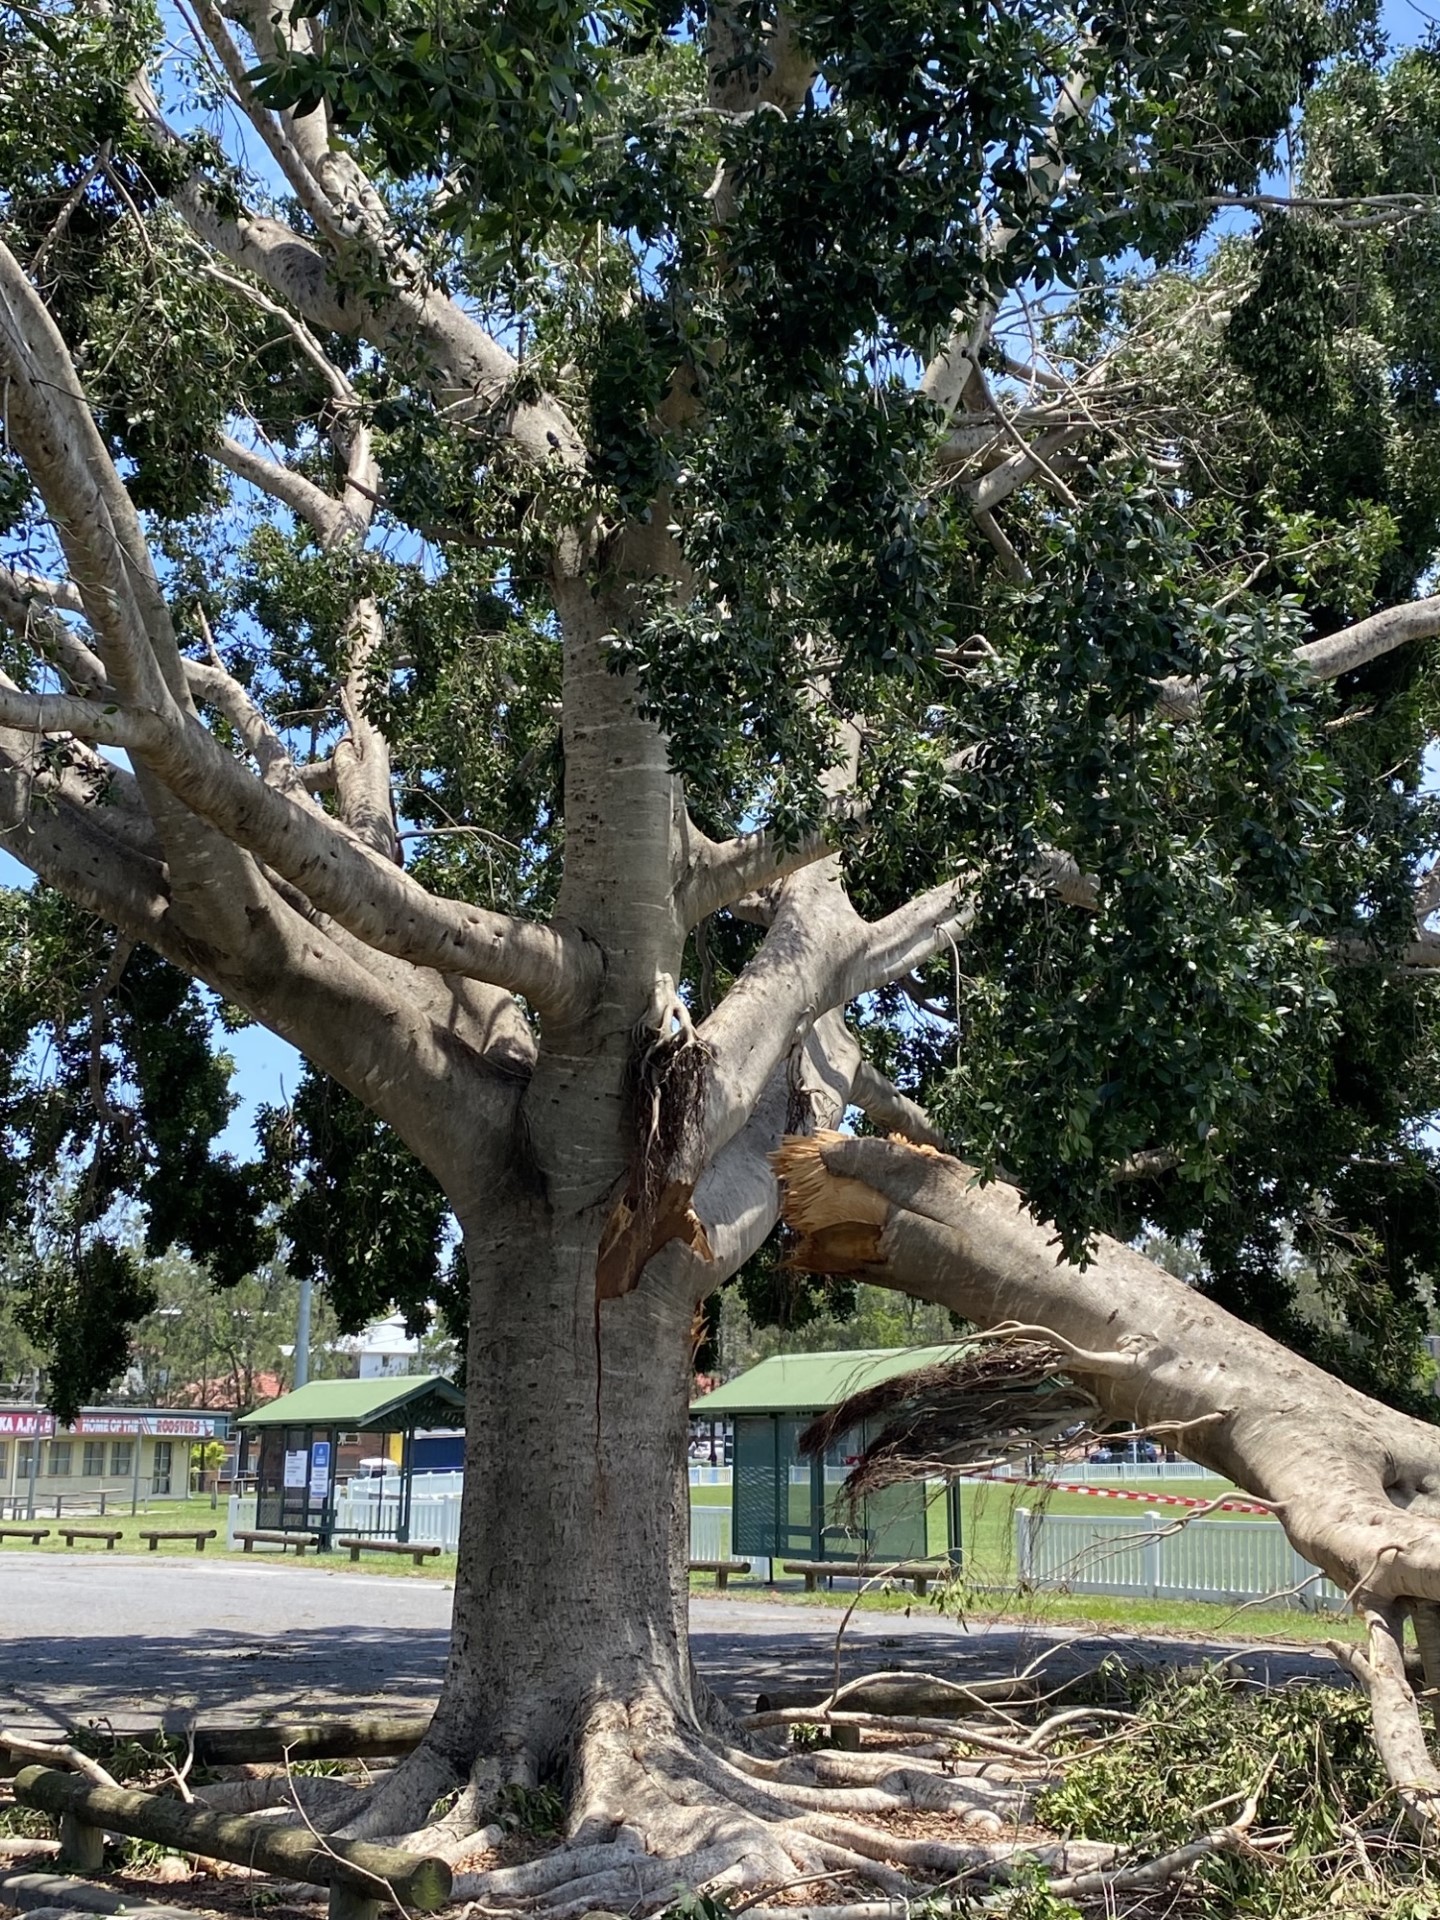 Professional arborists in action, safely removing a storm-damaged tree in Brisbane.